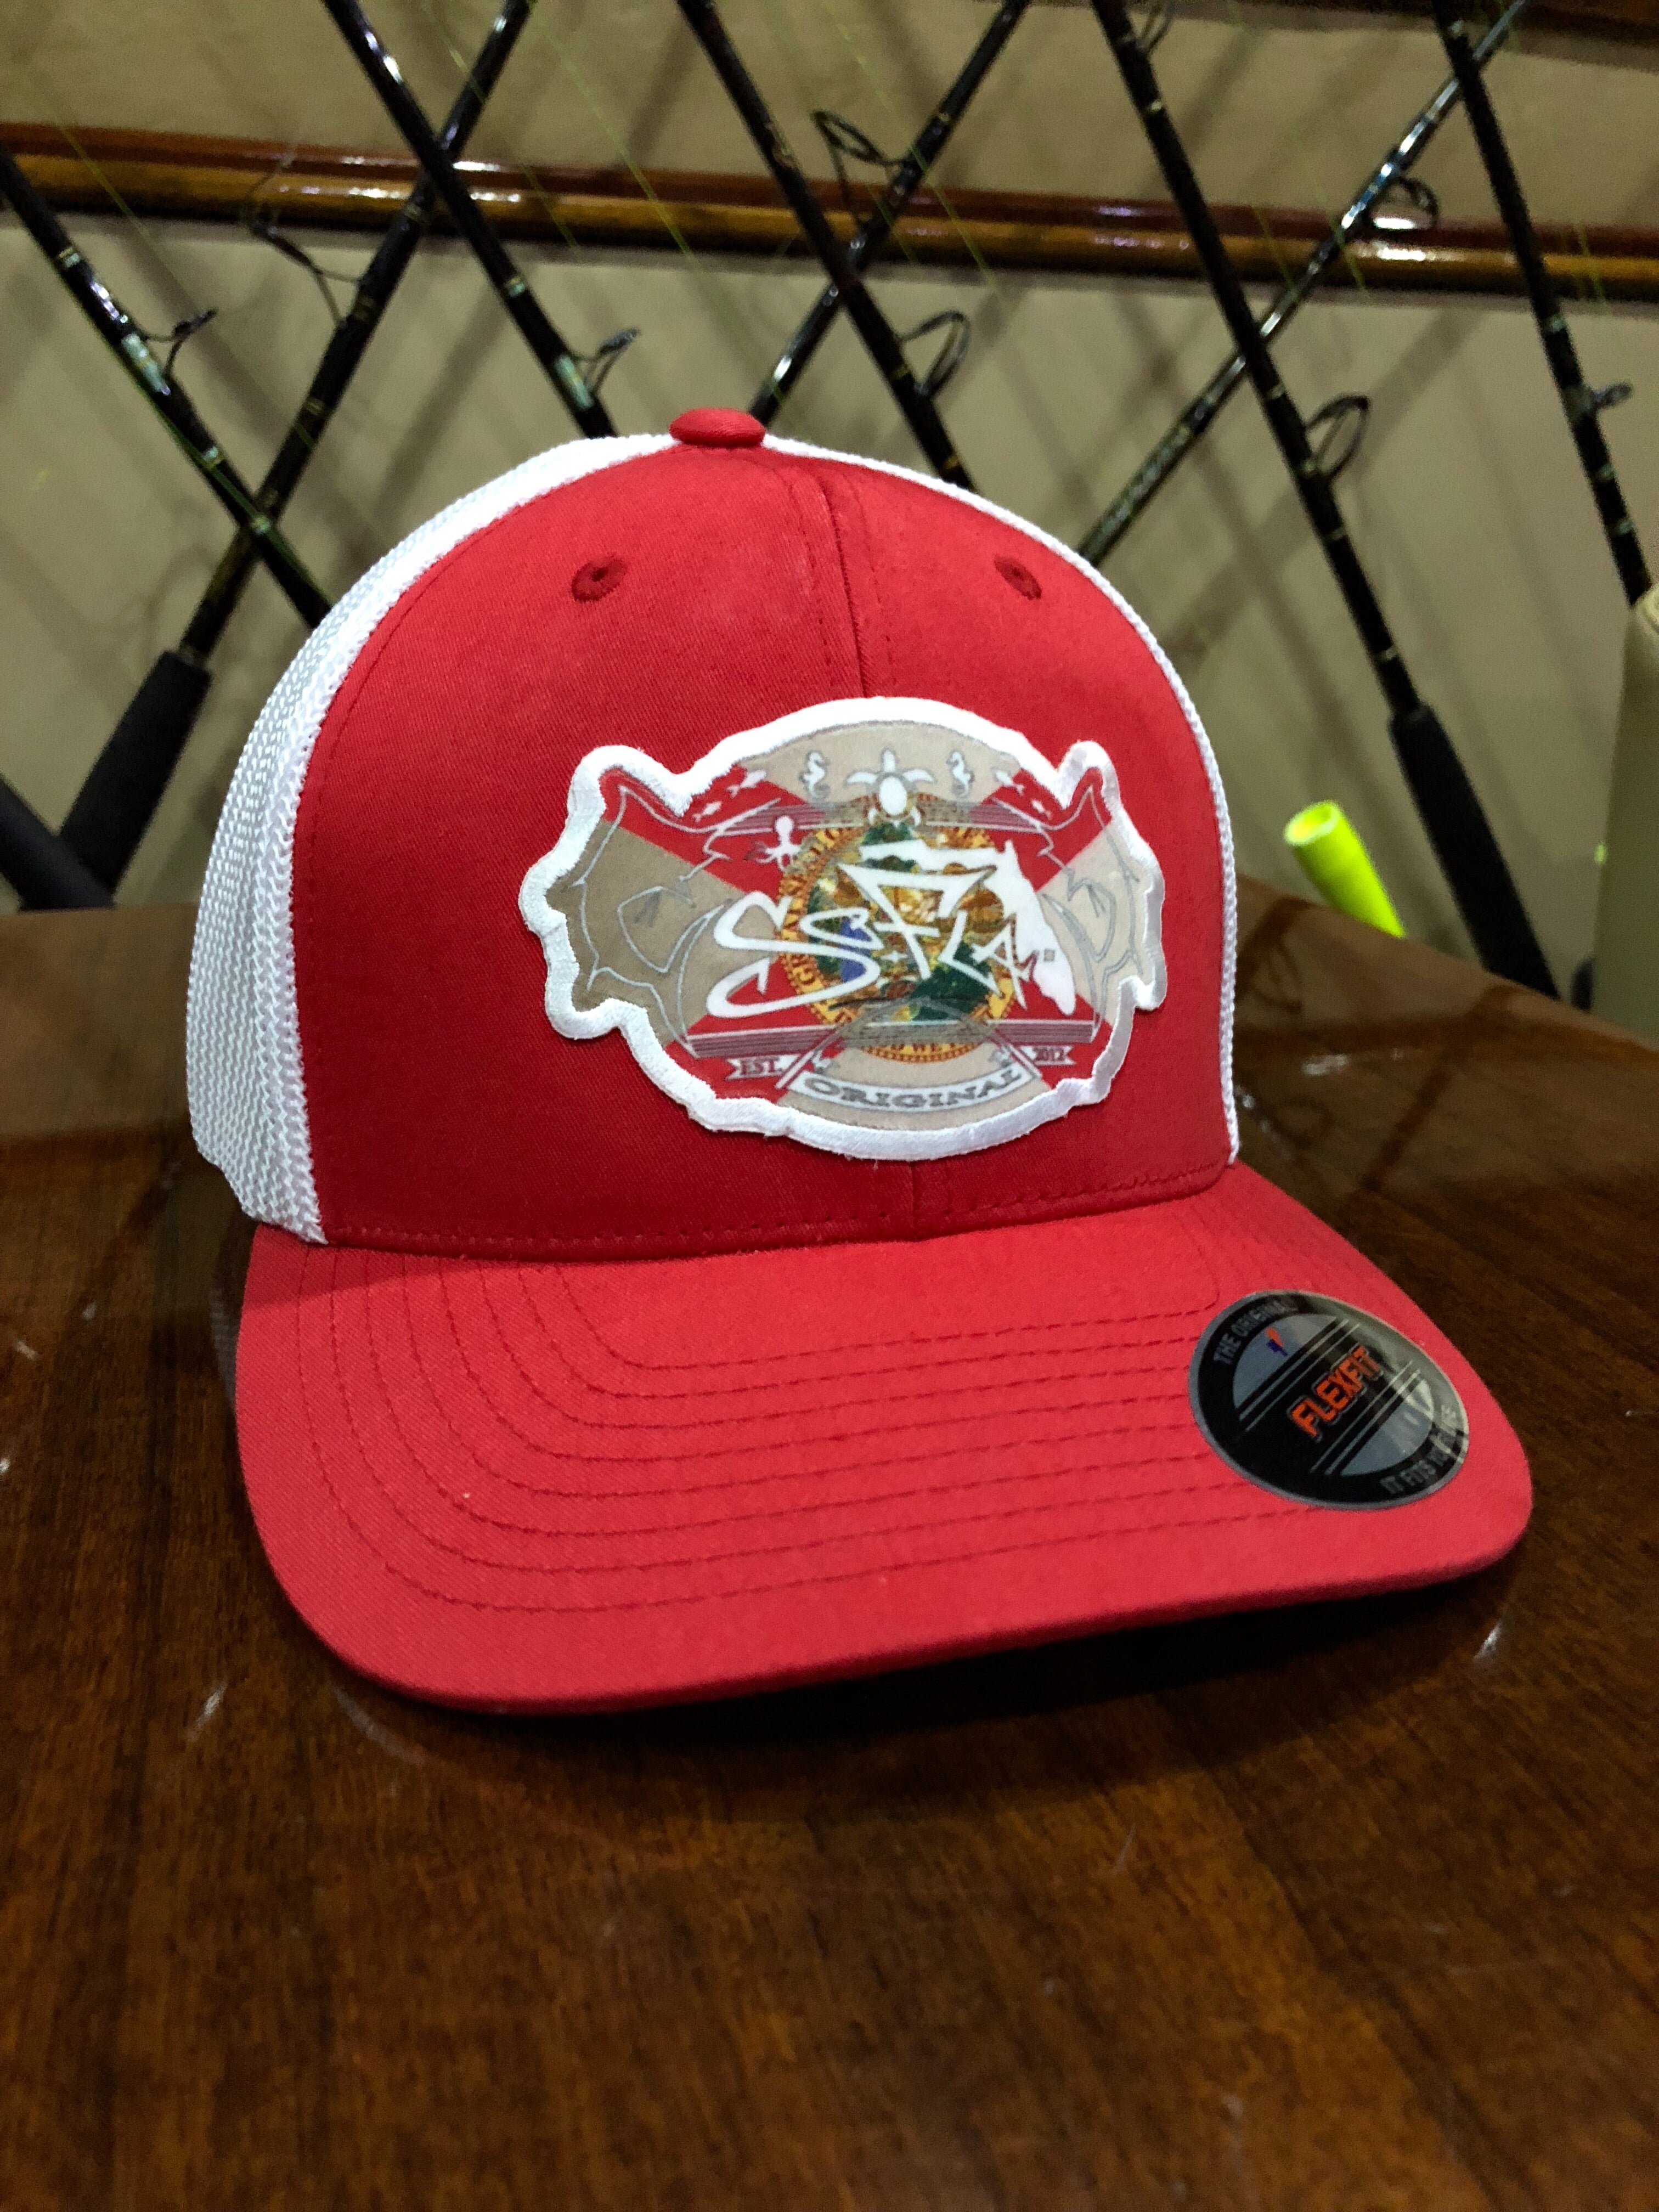 Red and White Heritage flex – Sunwear trucker So-Fla fit